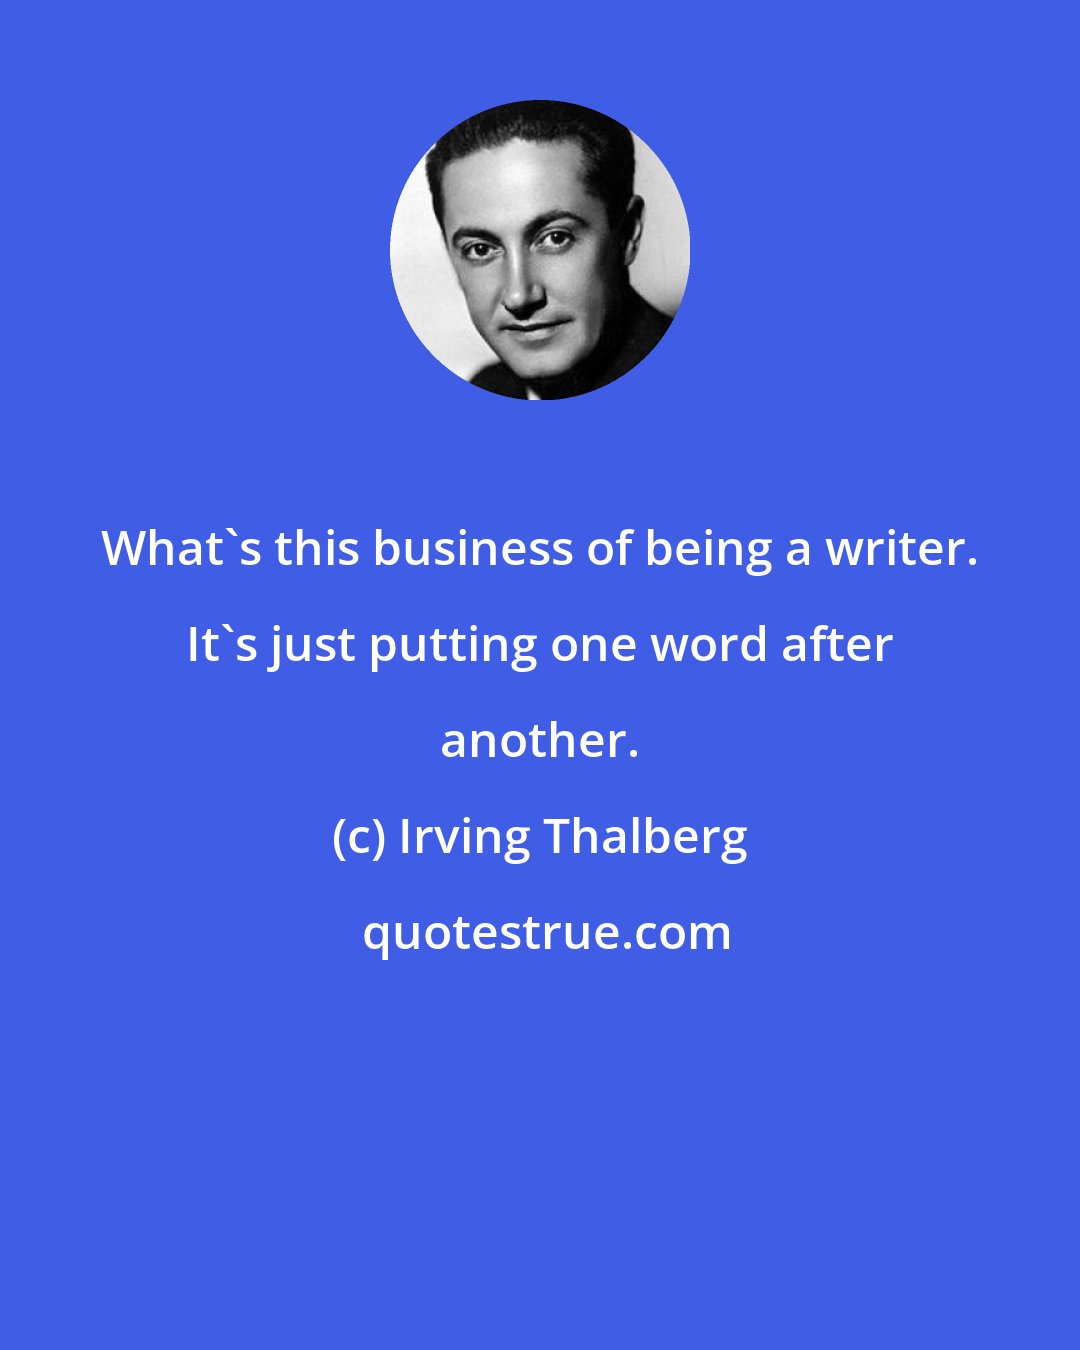 Irving Thalberg: What's this business of being a writer. It's just putting one word after another.